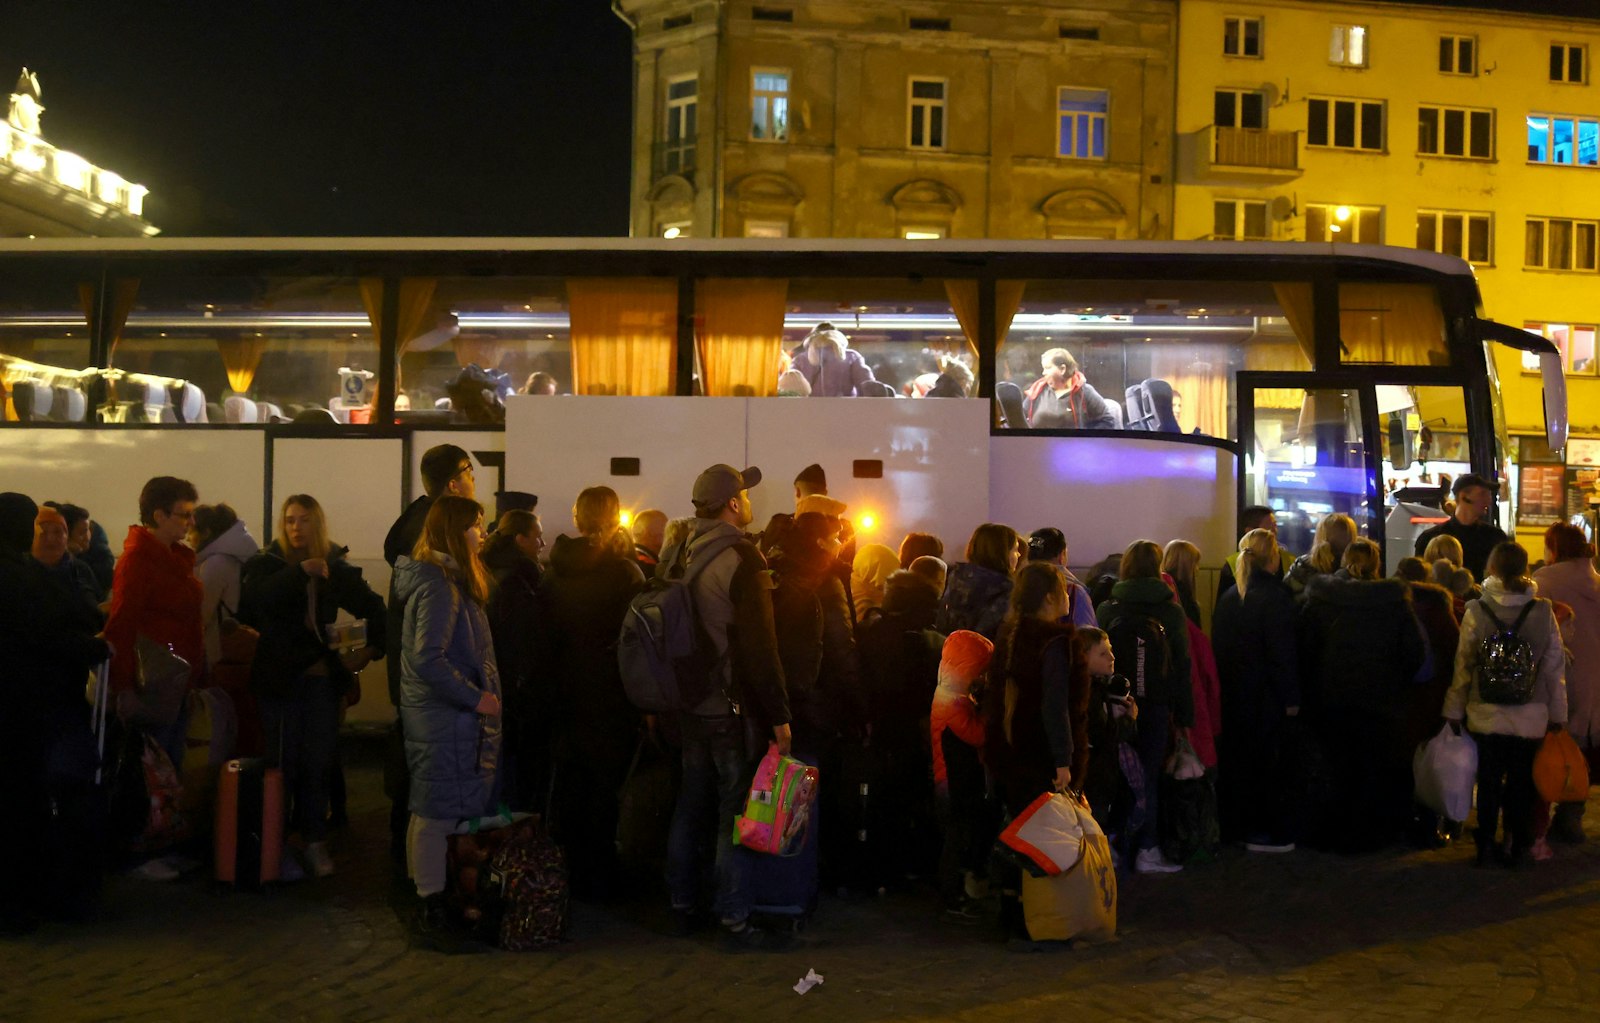 Ukrainian refugees in Przemysl, Poland, wait to board a bus to take them to a temporary shelter March 23, 2022, after fleeing the Russian invasion. (CNS photo/Hannah McKay, Reuters)